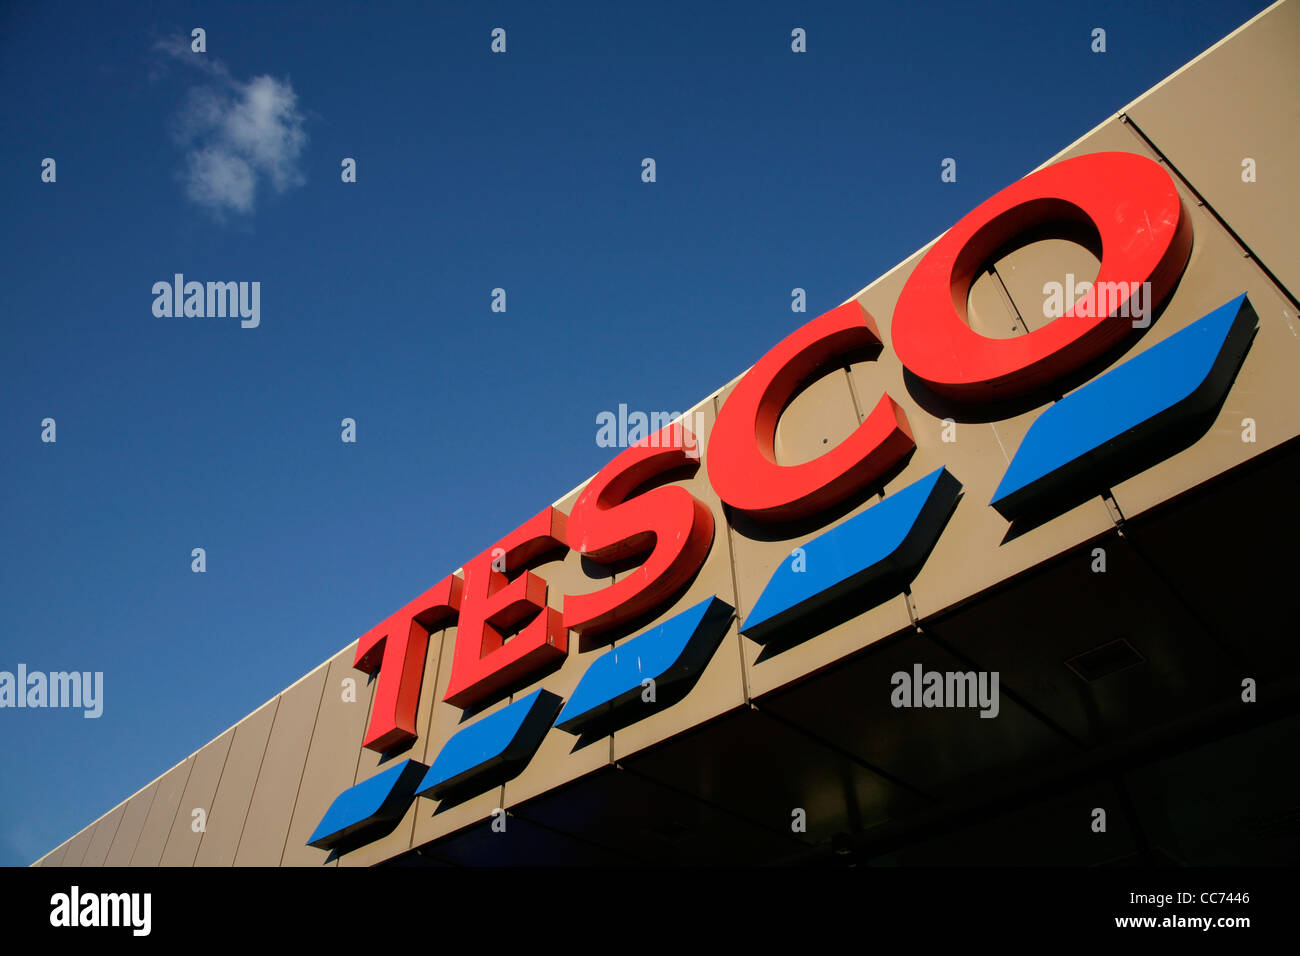 Tesco supermarket store sign seen against a blue sky Stock Photo